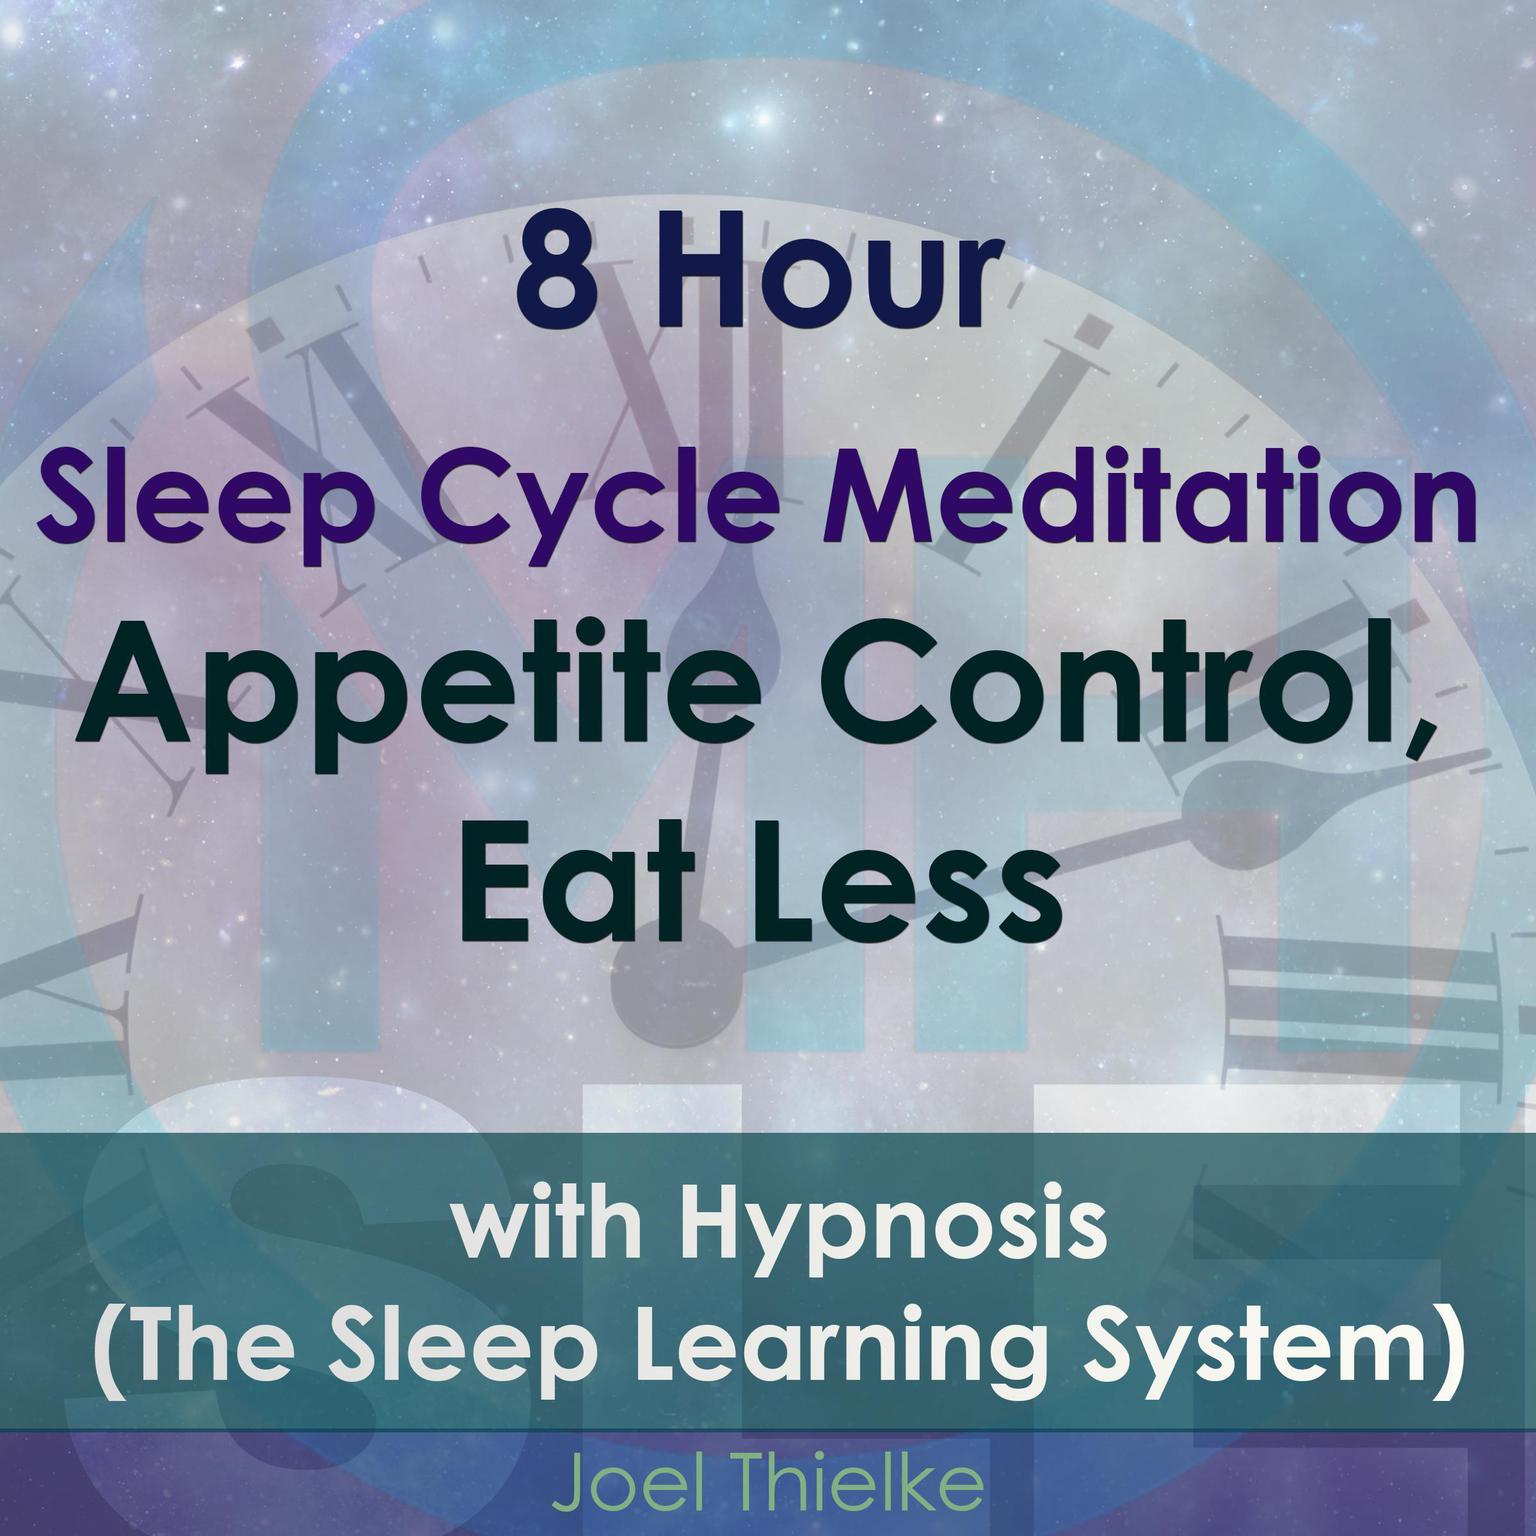 8 Hour Sleep Cycle Meditation: Appetite Control, Eat Less with Hypnosis (The Sleep Learning System) Audiobook, by Joel Thielke